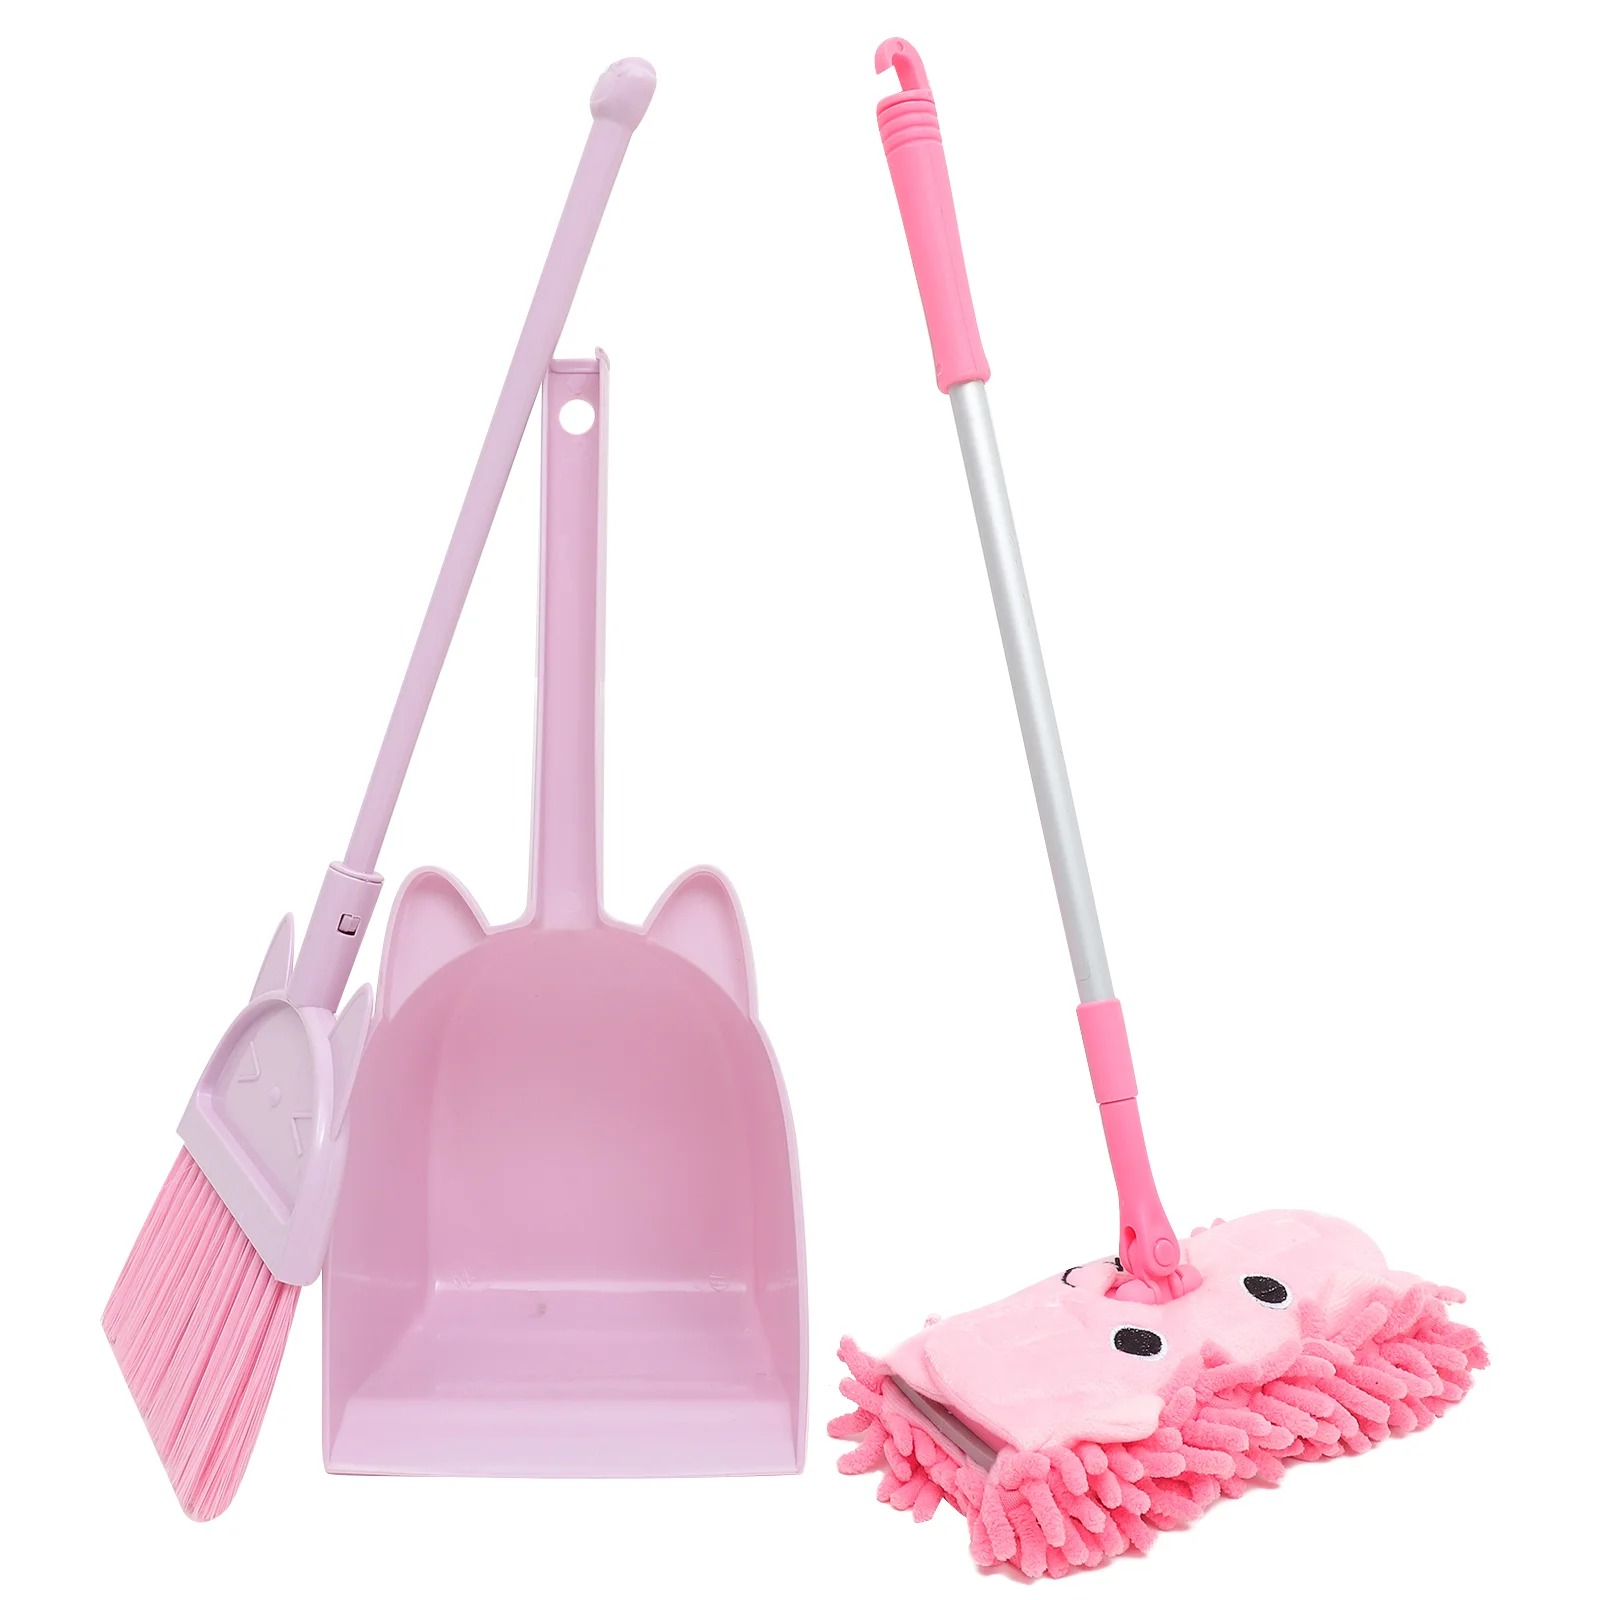 

Broom Dustpan Set Mop Toy Toddlers Baby Household Kids Sweeping Toys Stainless Steel Small Cleaning